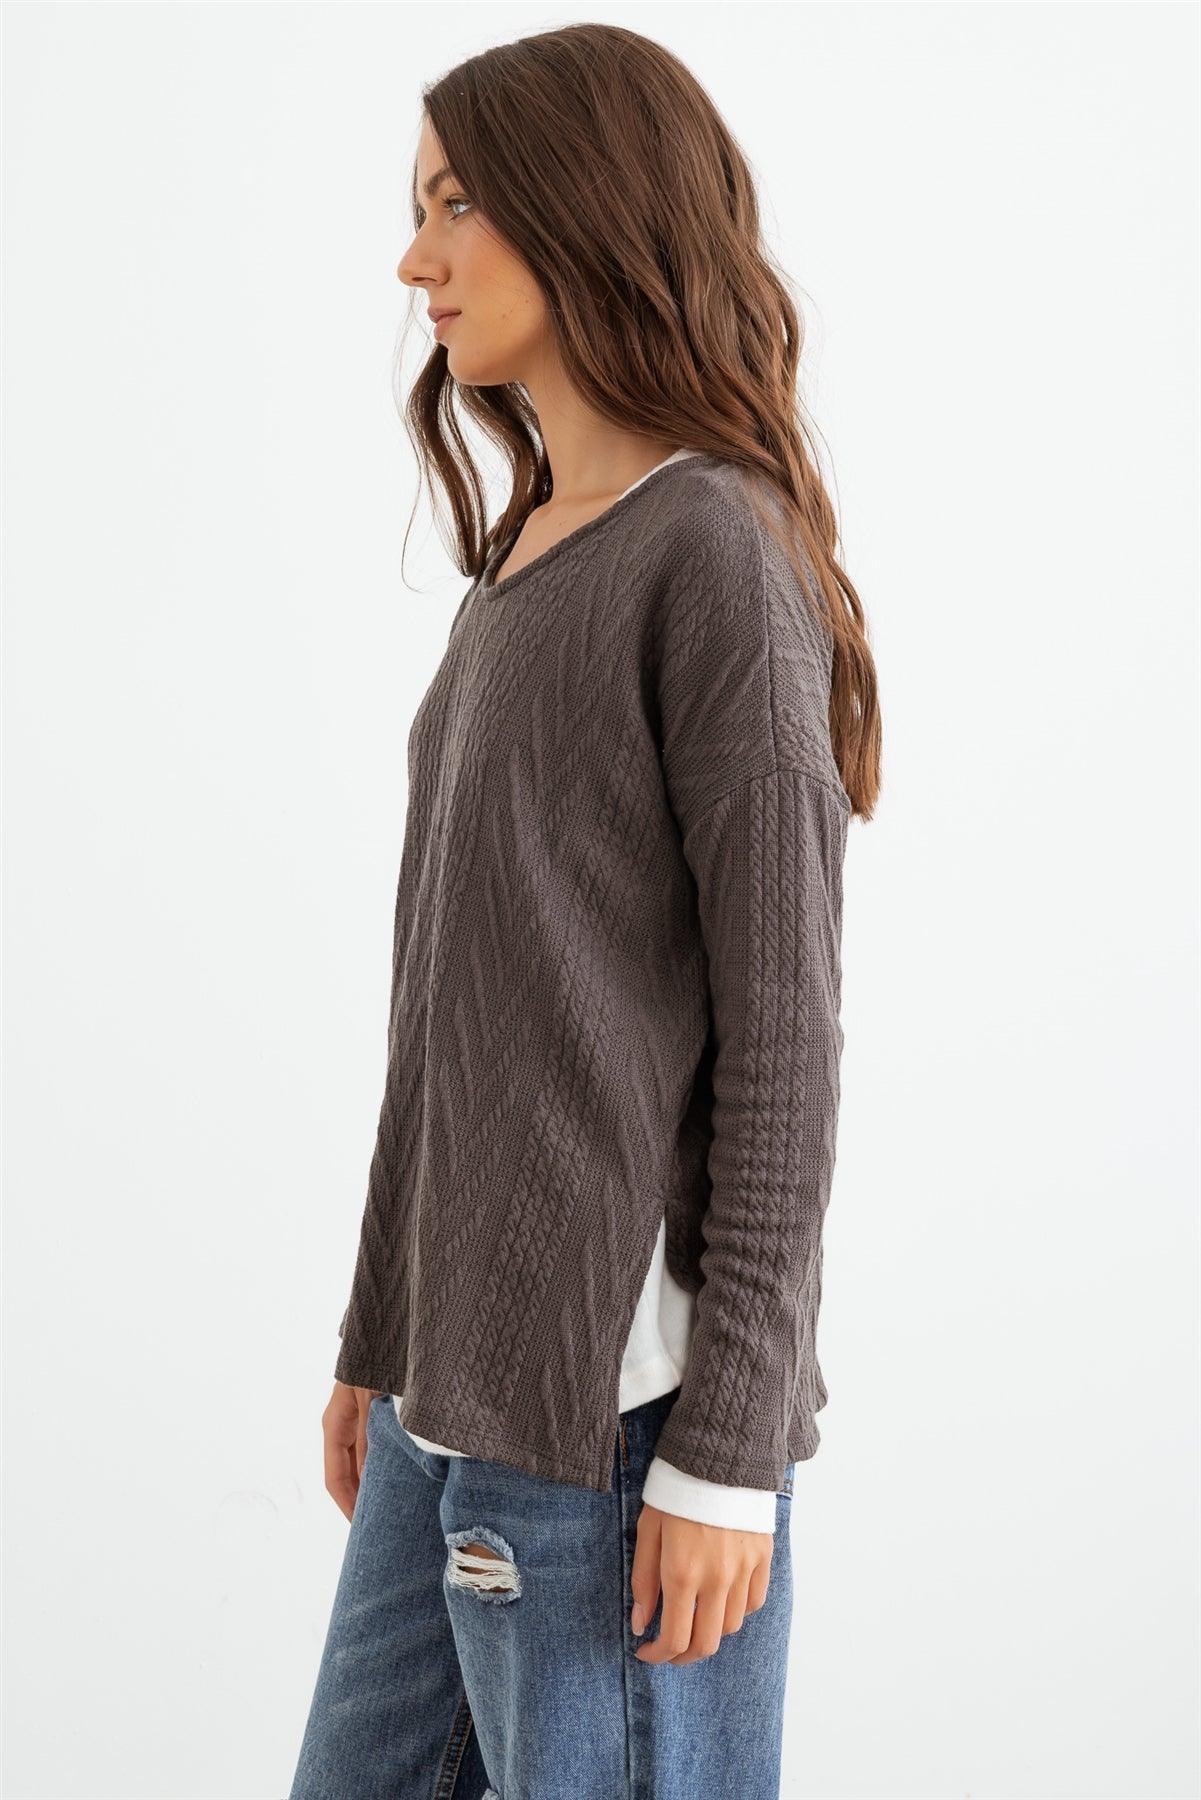 Charcoal Knit Round Neck Long Sleeve Top /1-1-1